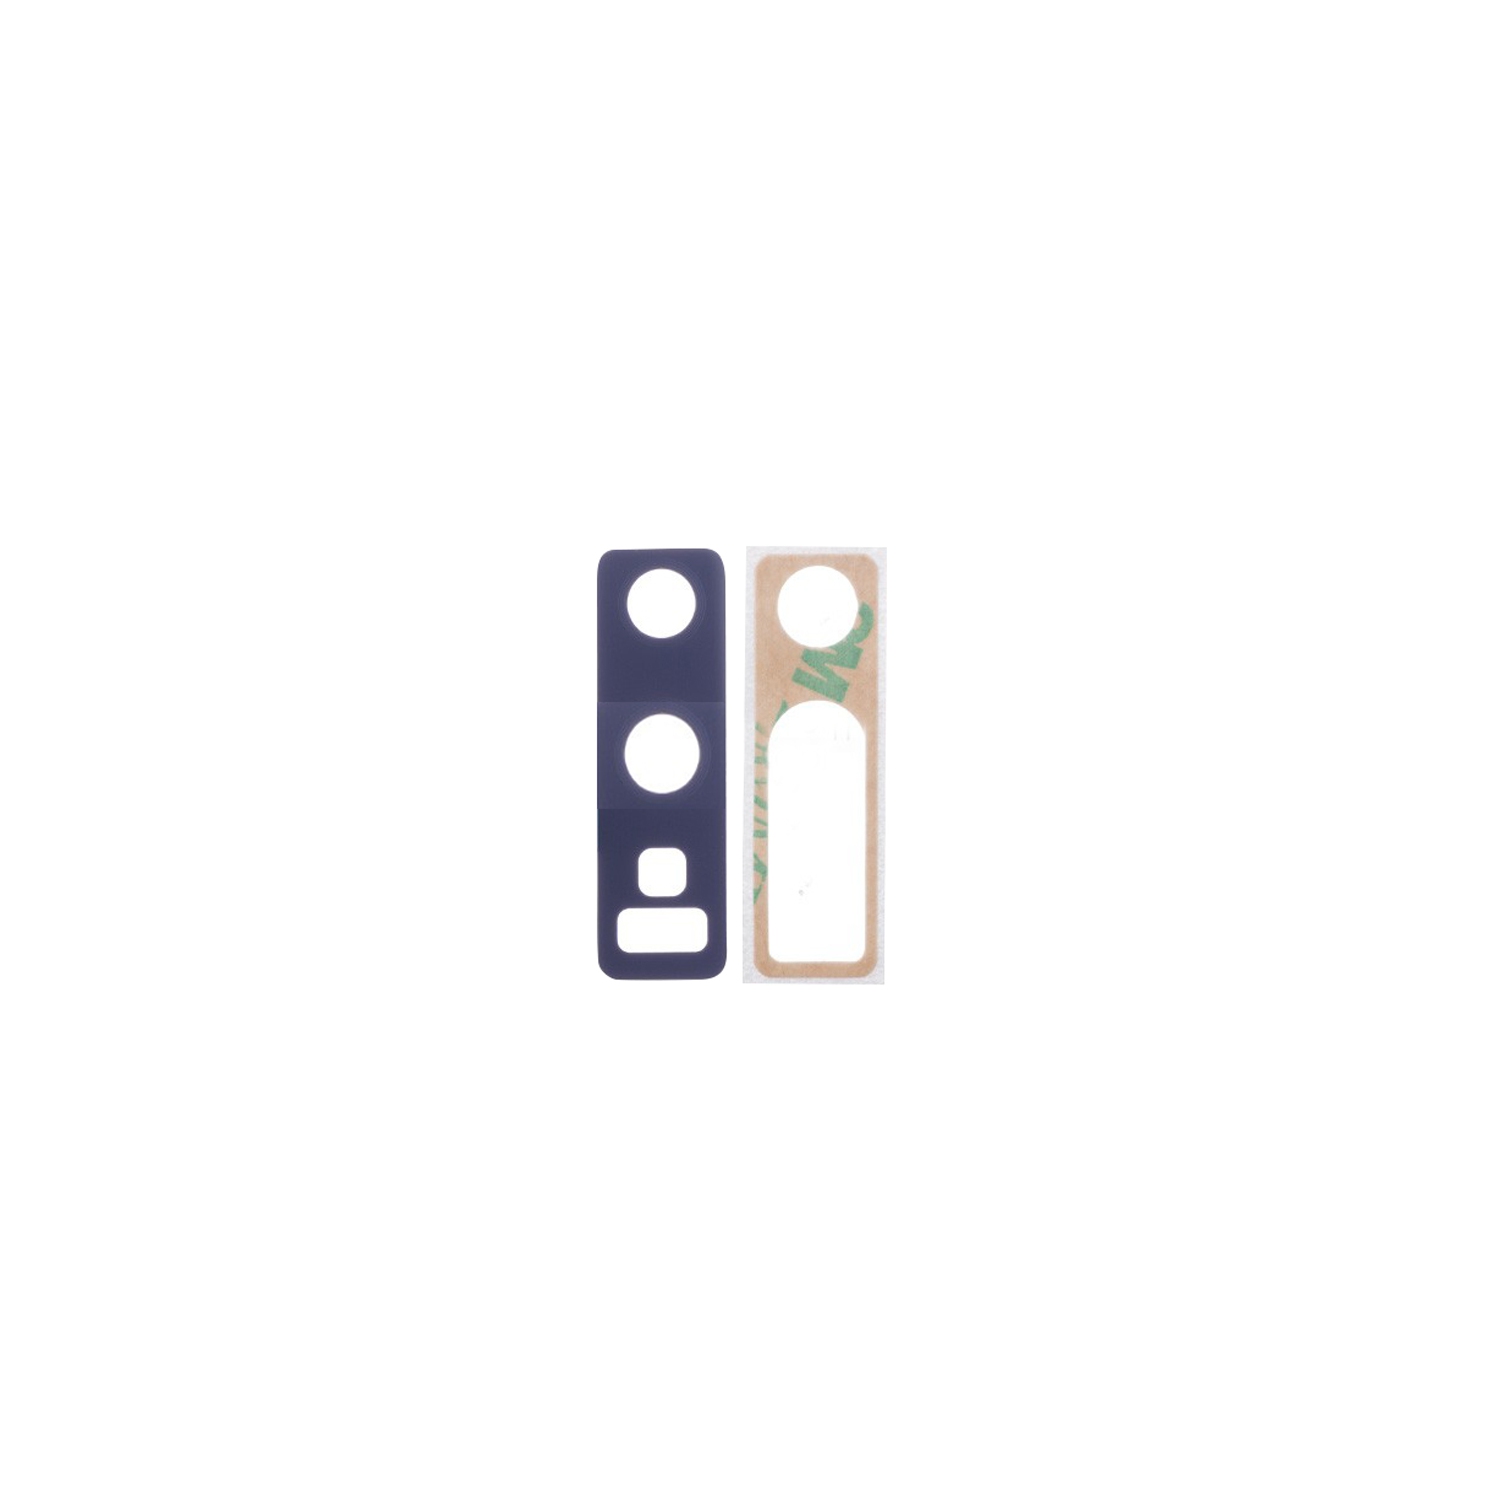 Samsung Galaxy Note 9 Camera Glass Lens Replacement - Blue